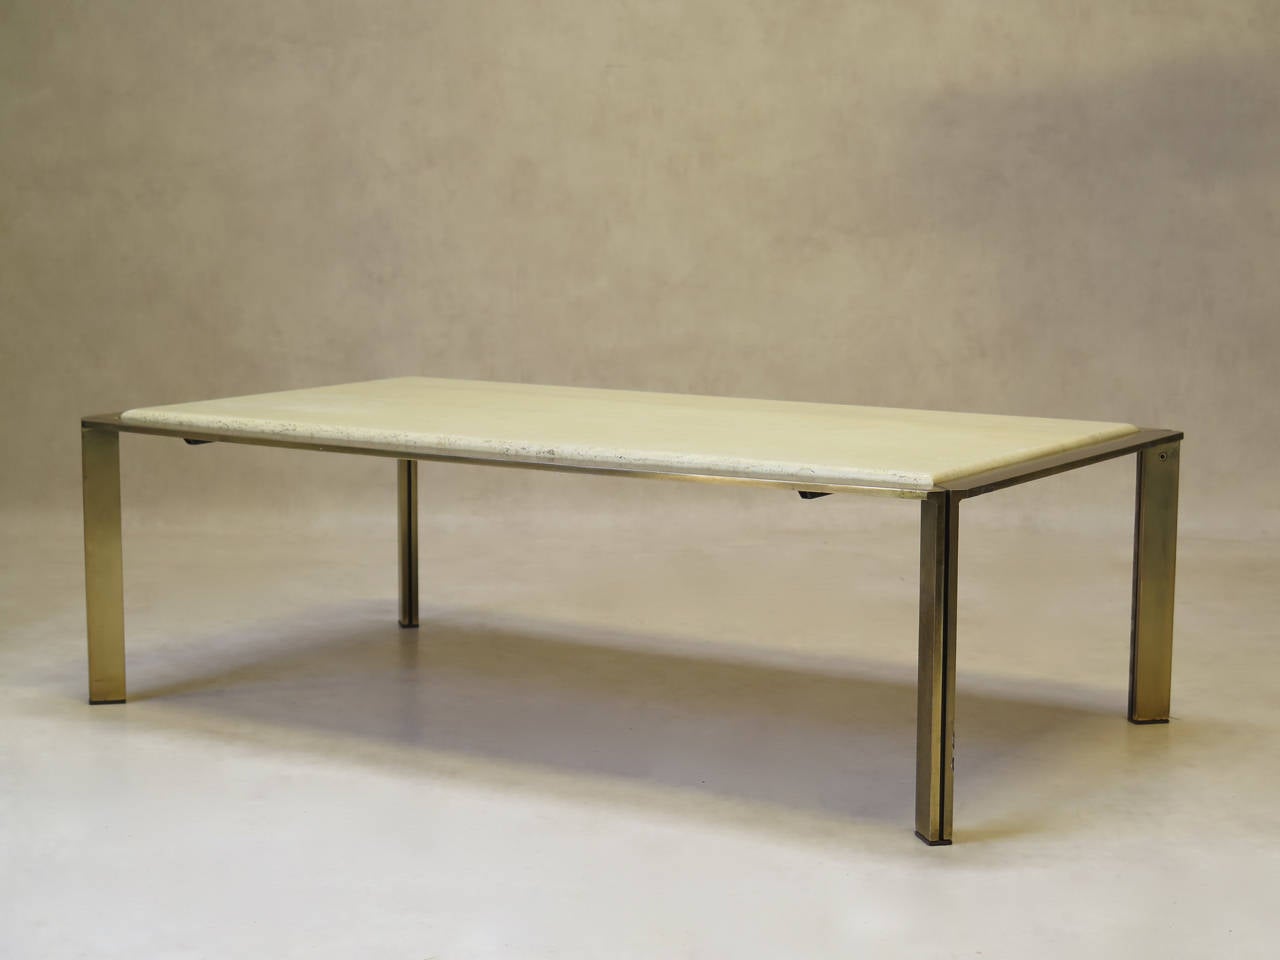 Late 20th Century Travertine and Steel Coffee Table, France 1970s For Sale